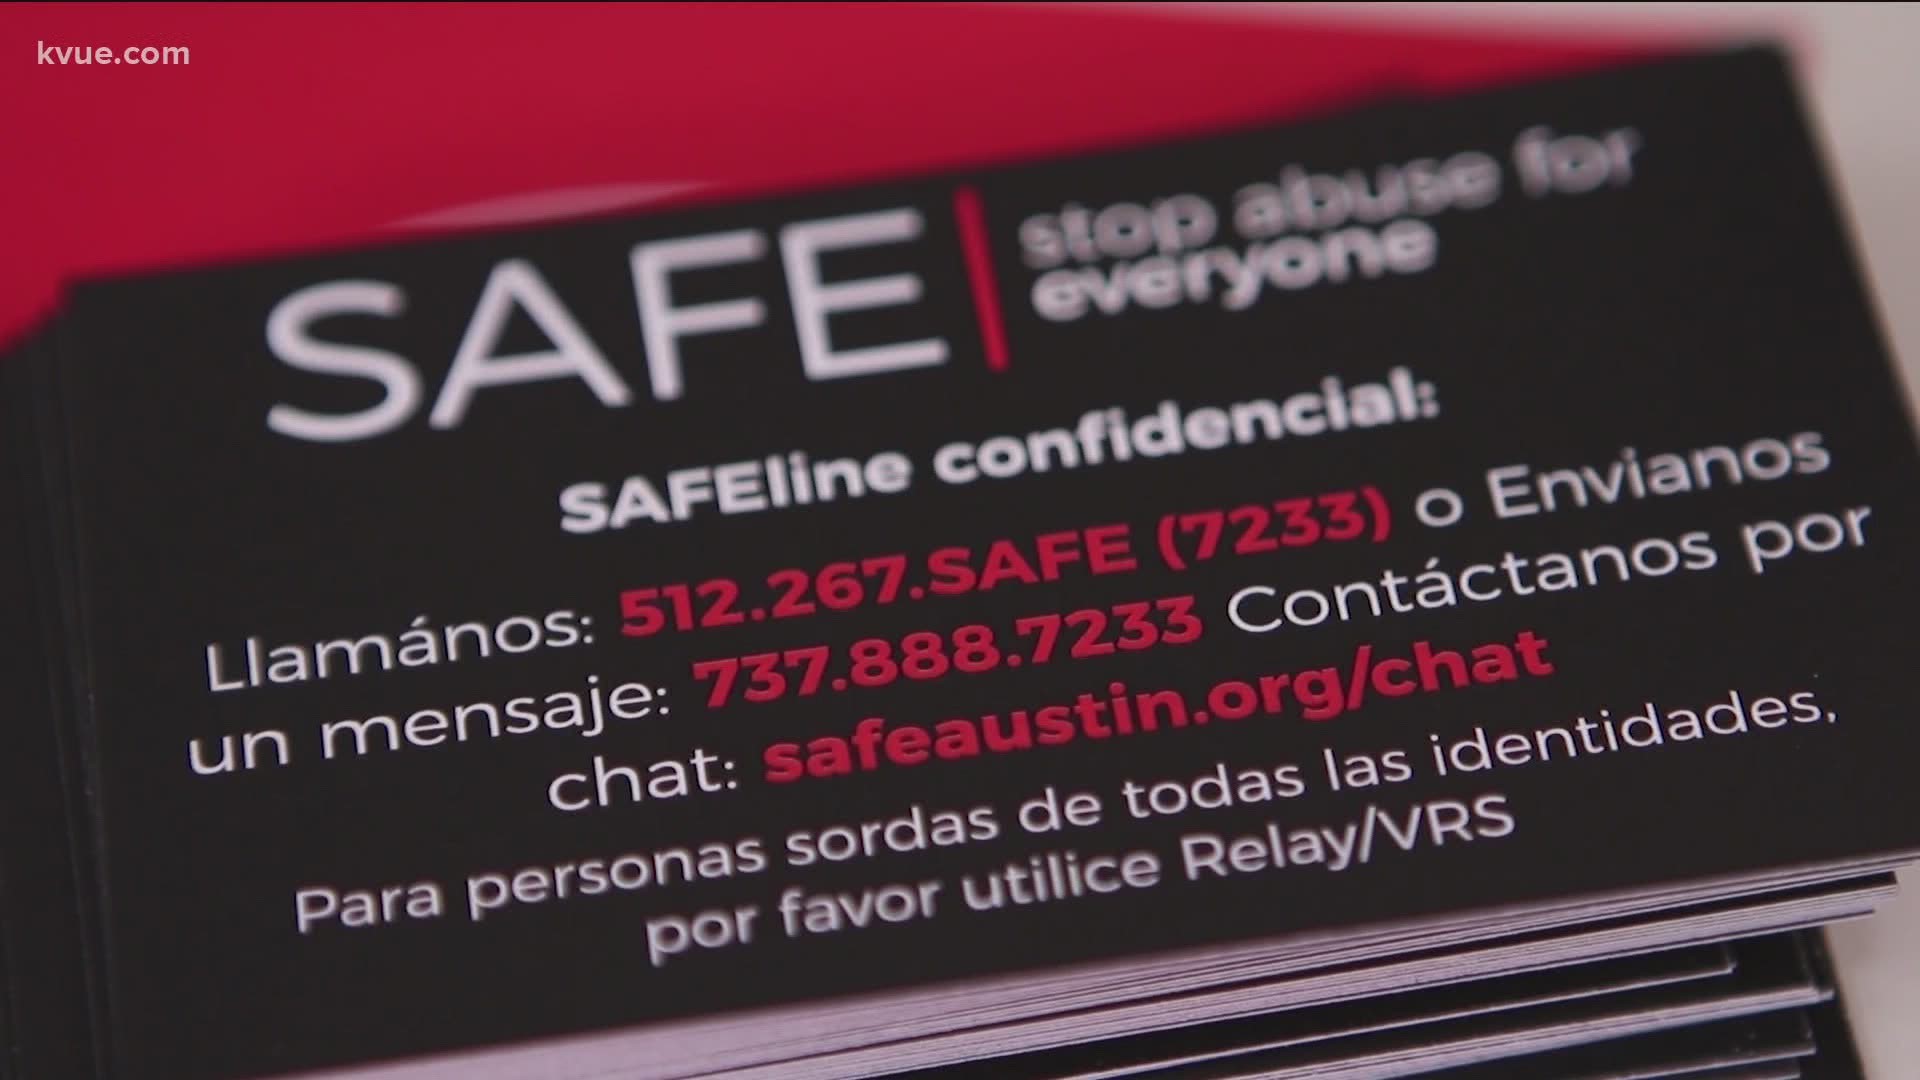 The SAFE Alliance has gotten more than 3,000 domestic violence calls, texts and chats in the Austin area since March.